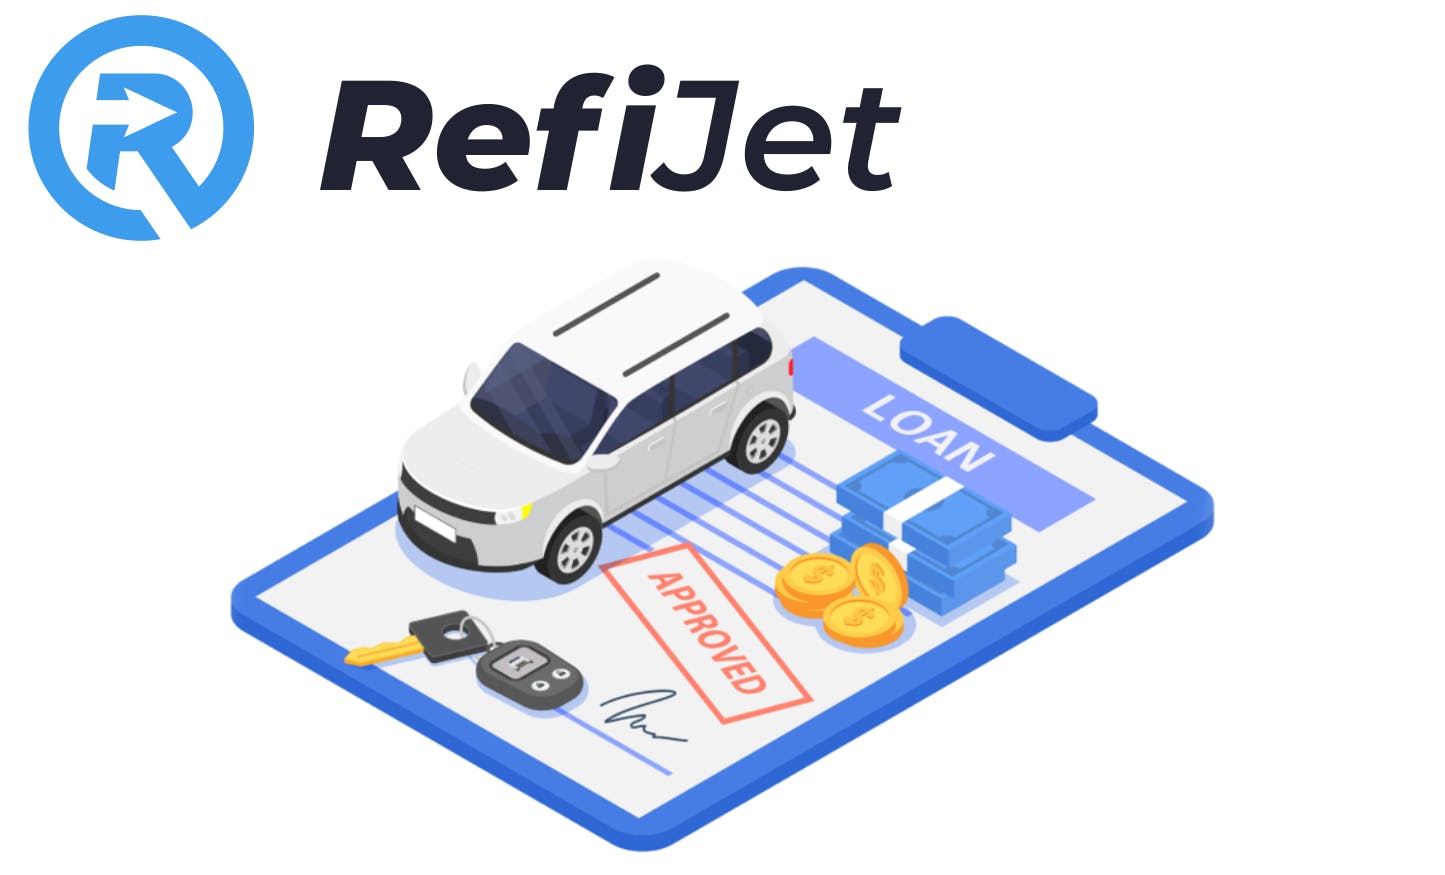 RefiJet Review: Pros and Cons, Prices, and Benefits